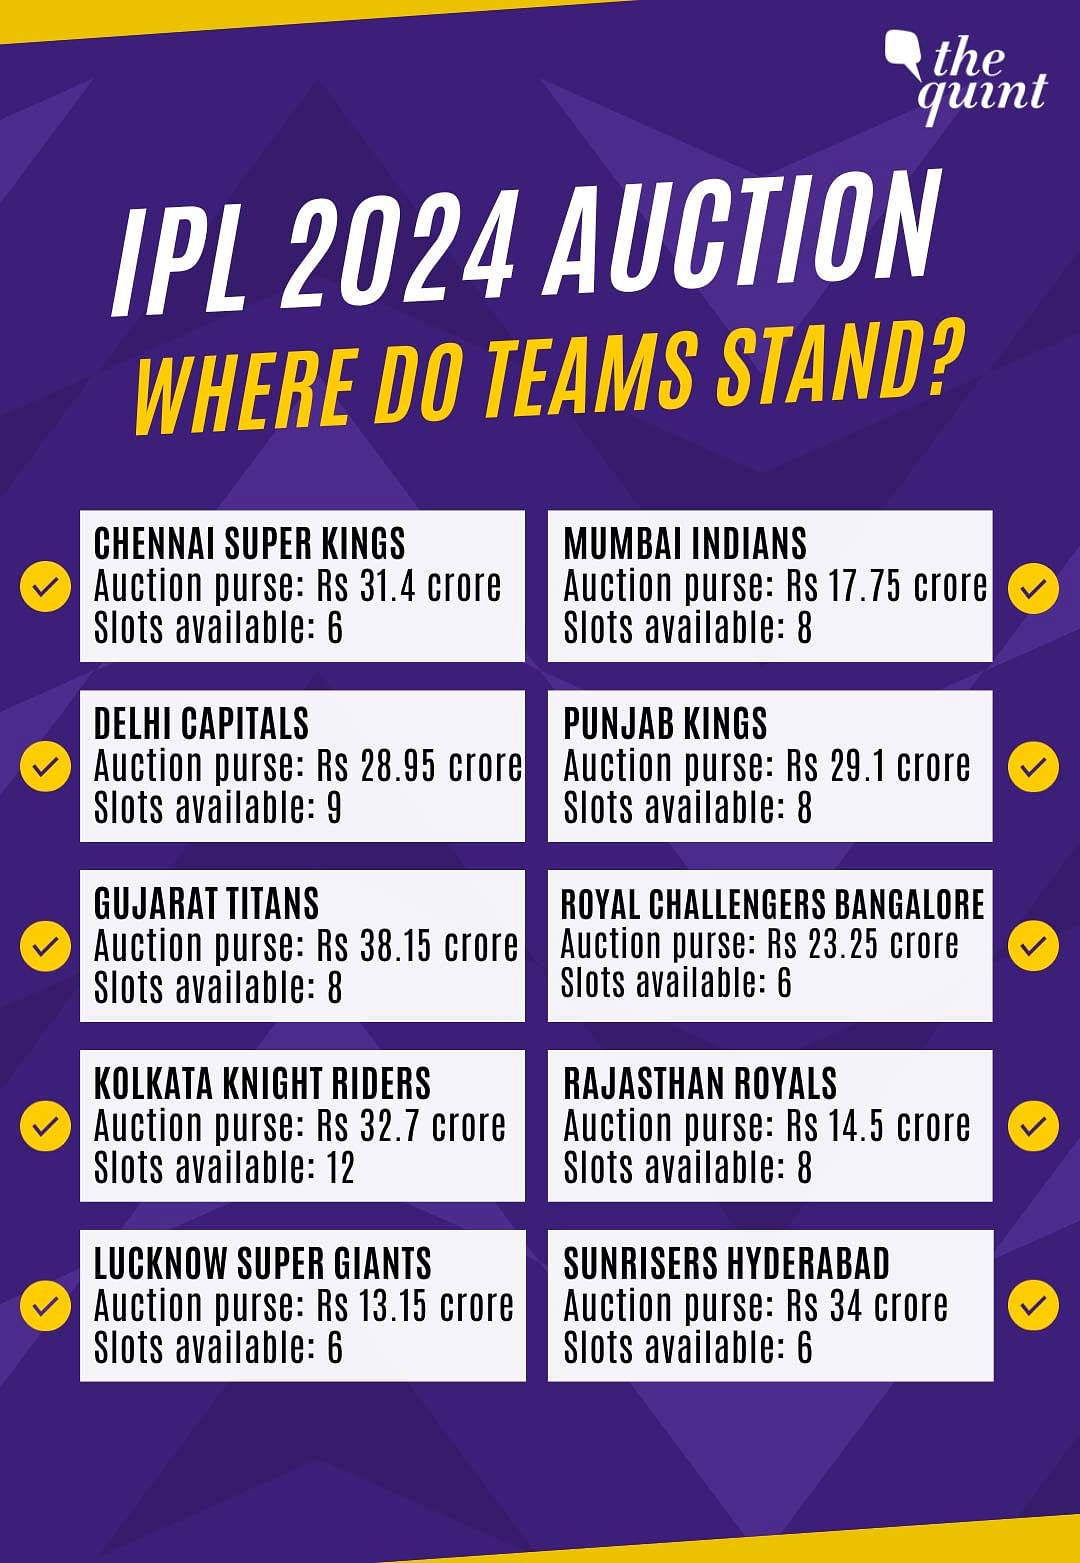 #IPL2024 | Here's a collated list of players of all 10 teams retained and released ahead of the auction in December: